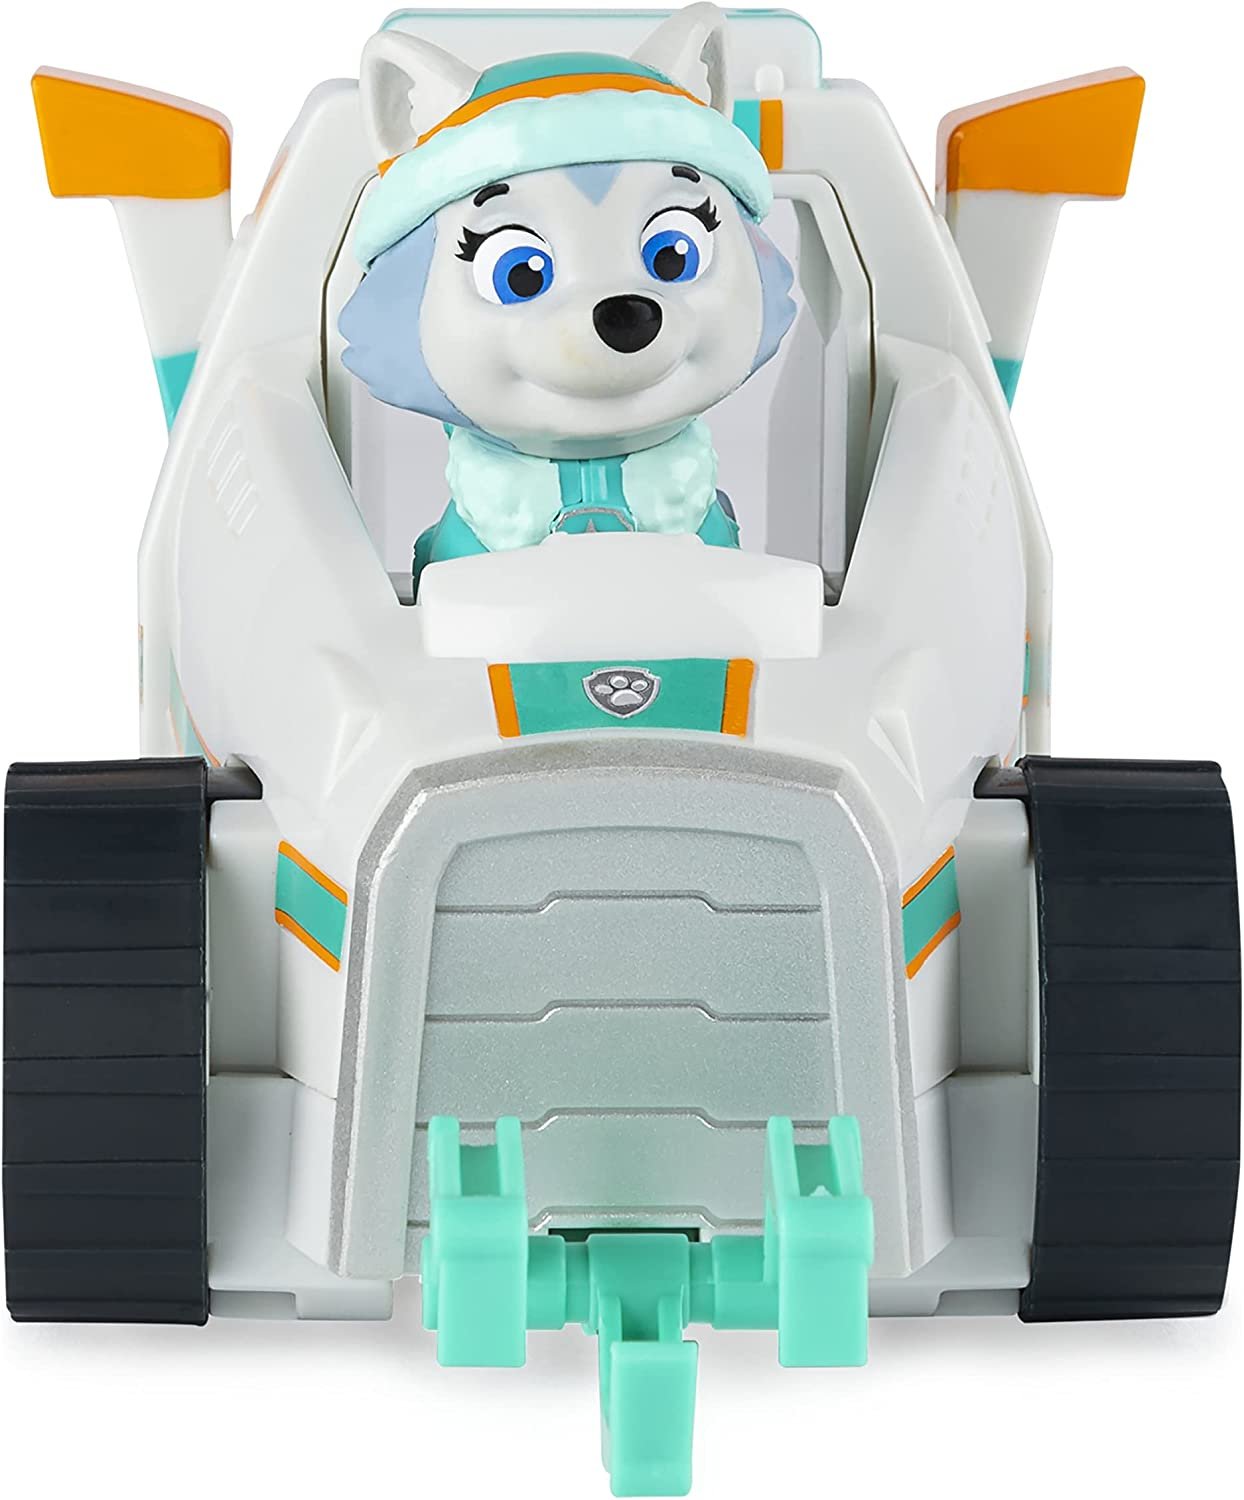 PAW Patrol, Everestâ€™s Snow Plow Vehicle with Collectible Figure, for Kids Aged 3 and Up - image 5 of 9